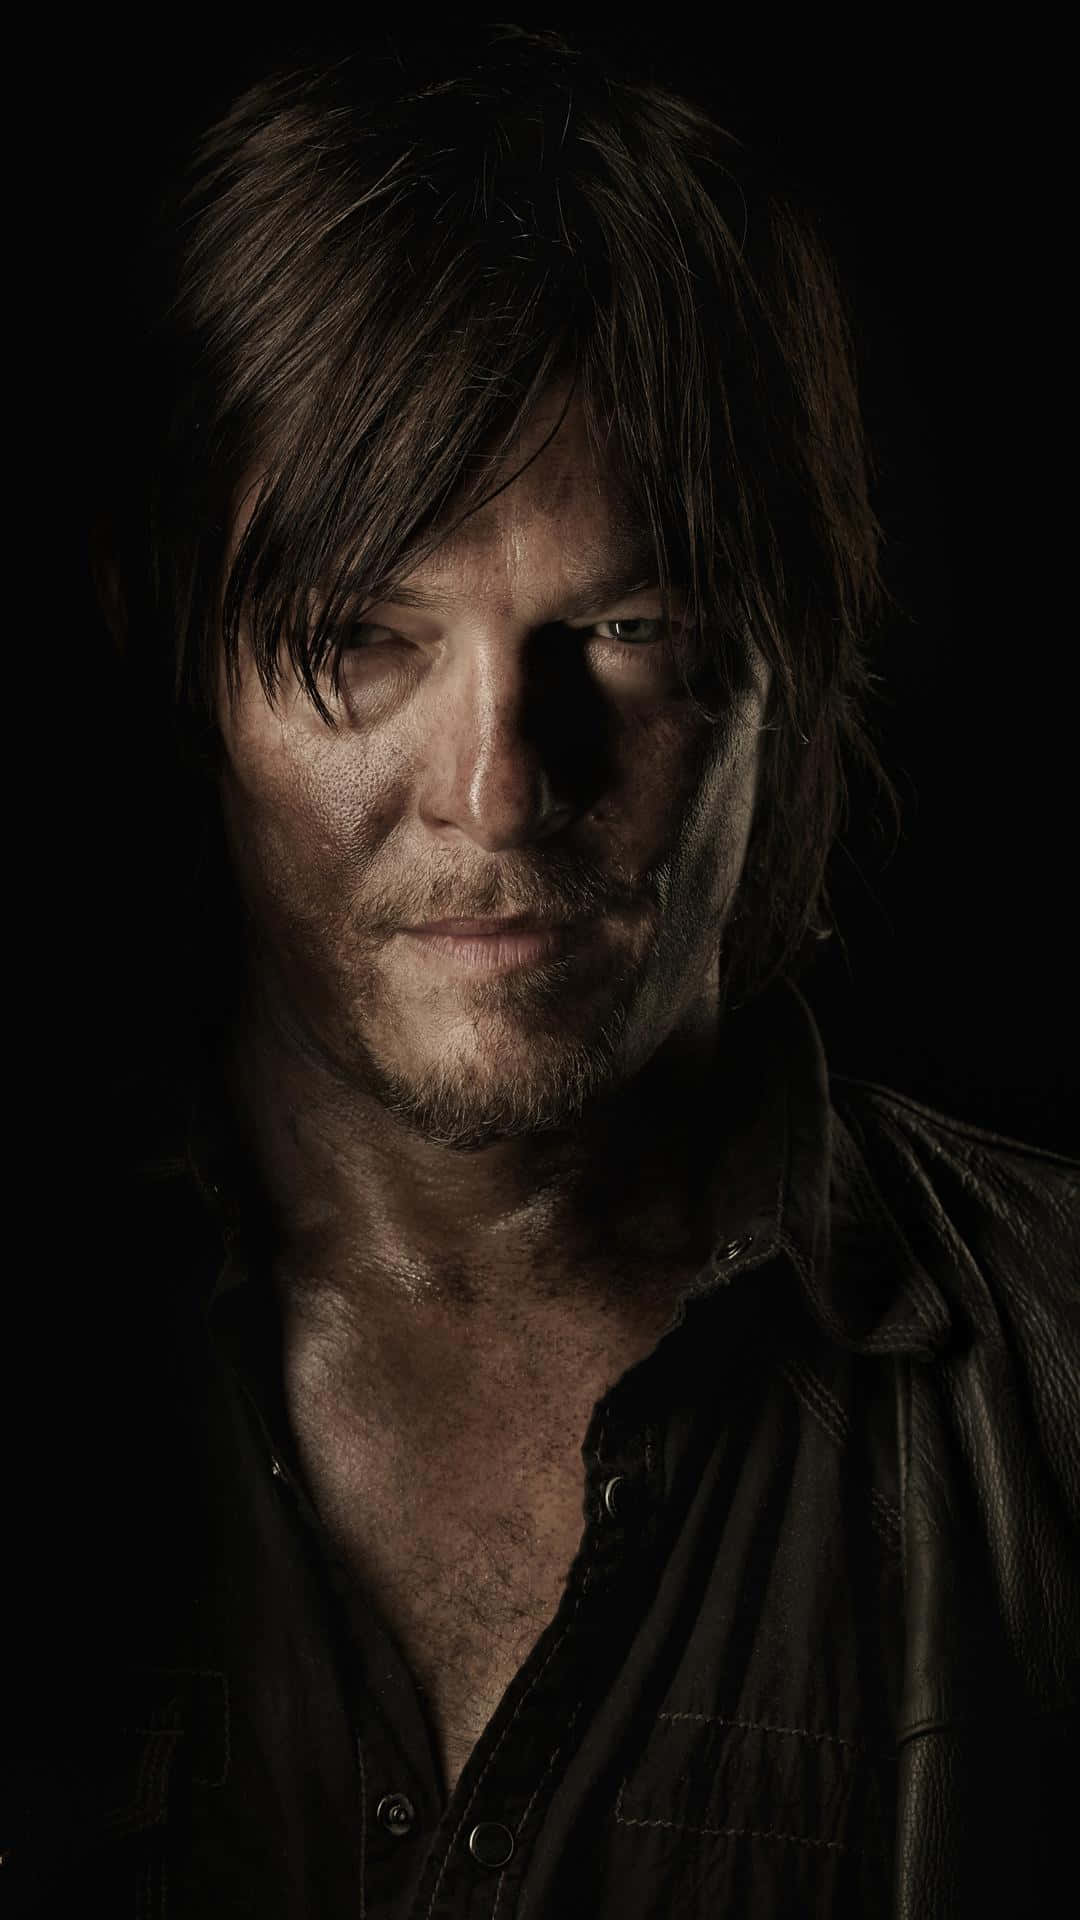 Take your entertainment to the next level with The Walking Dead Iphone Wallpaper! Wallpaper